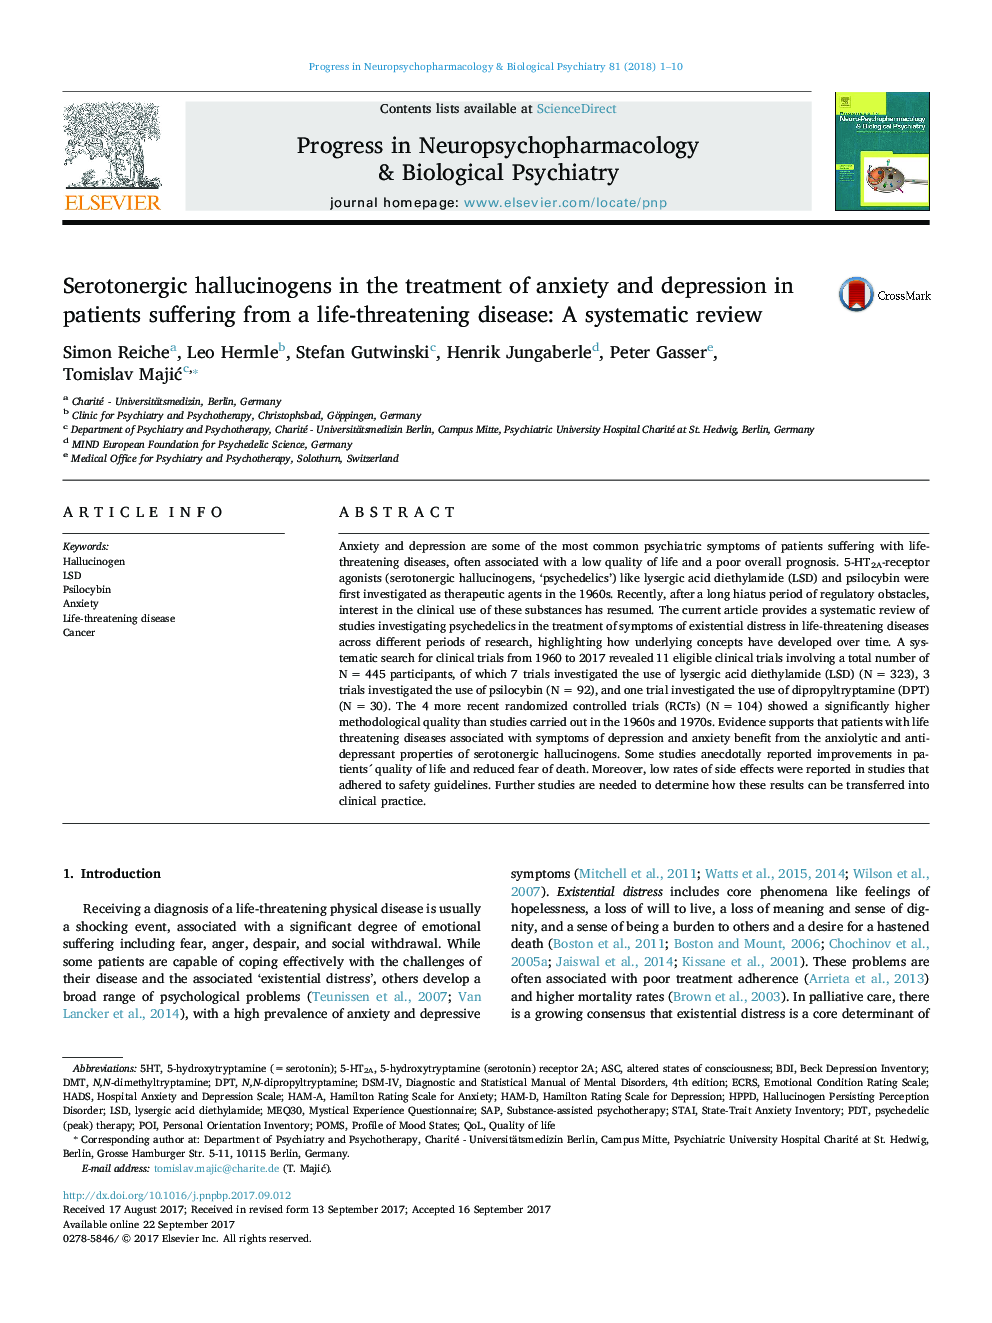 Serotonergic hallucinogens in the treatment of anxiety and depression in patients suffering from a life-threatening disease: A systematic review